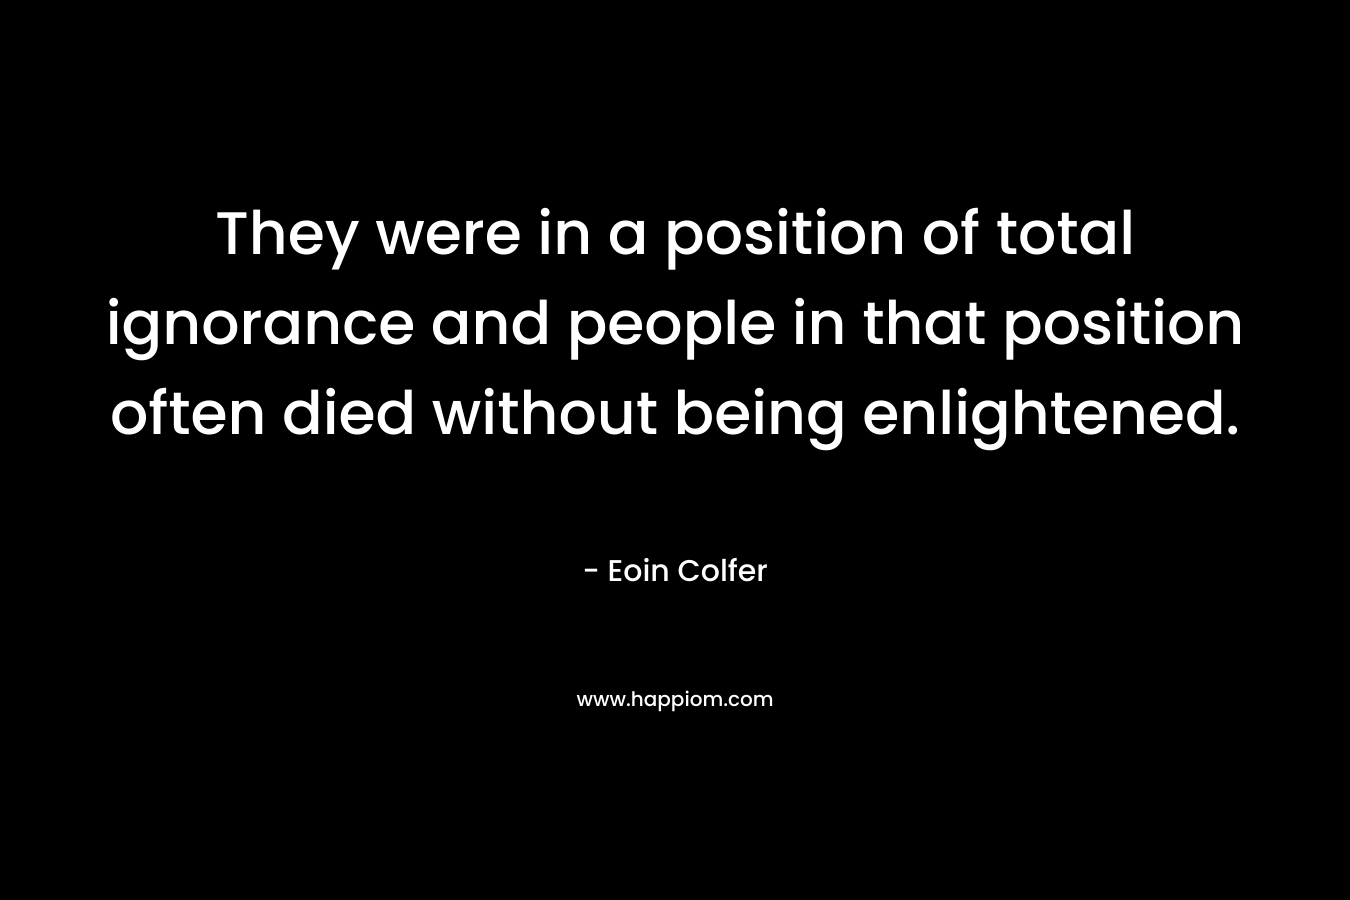 They were in a position of total ignorance and people in that position often died without being enlightened. – Eoin Colfer